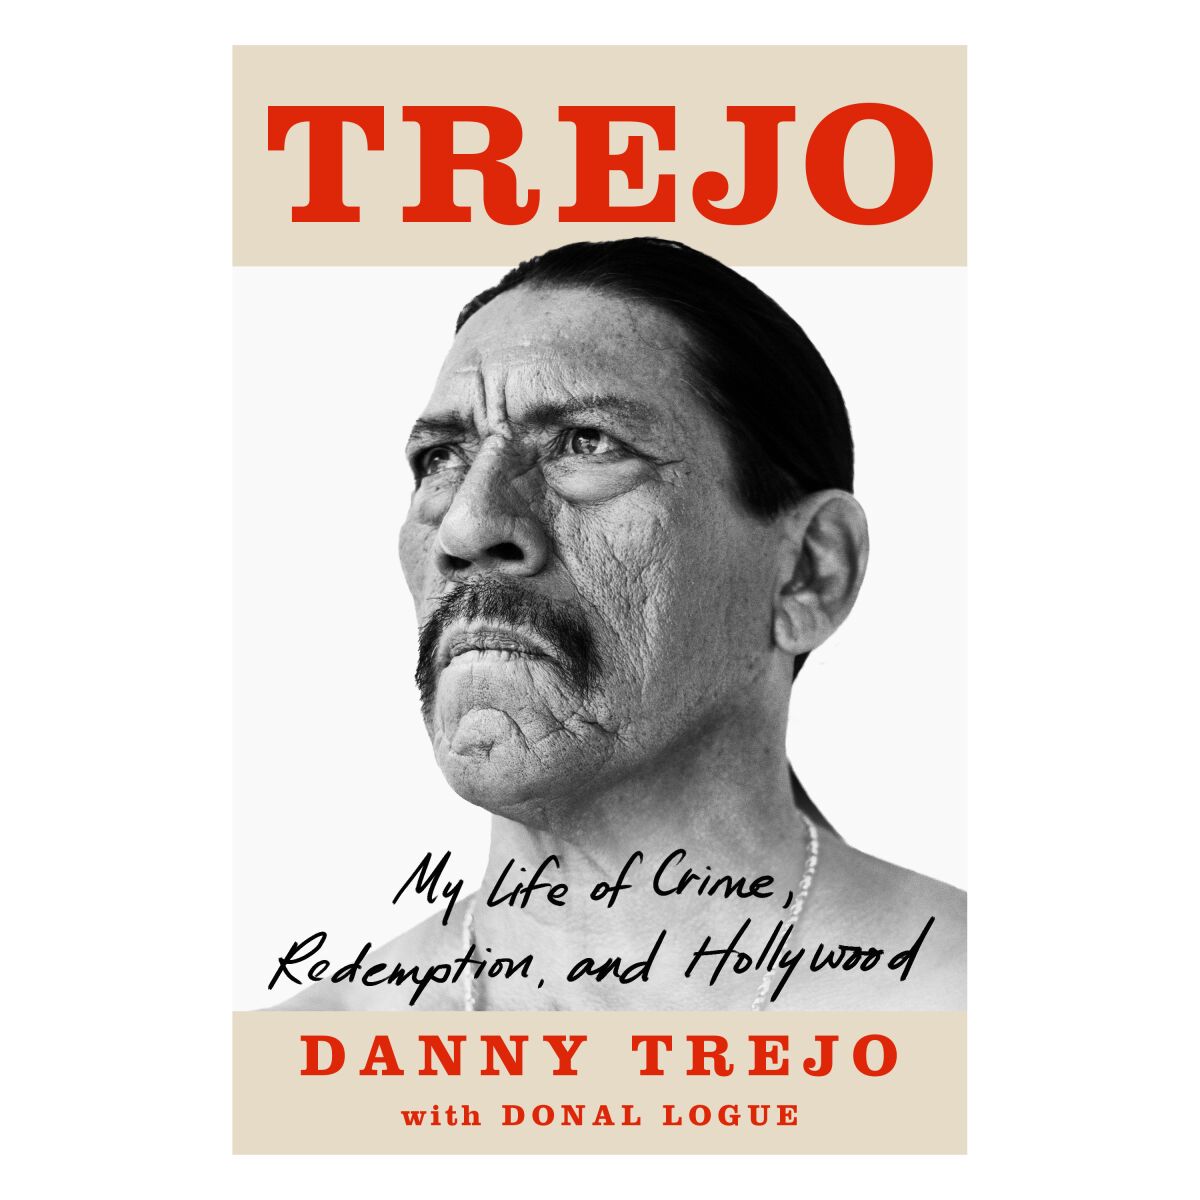 A scowling Danny Trejo on the cover of "Trejo," by Danny Trejo and Donal Logue.